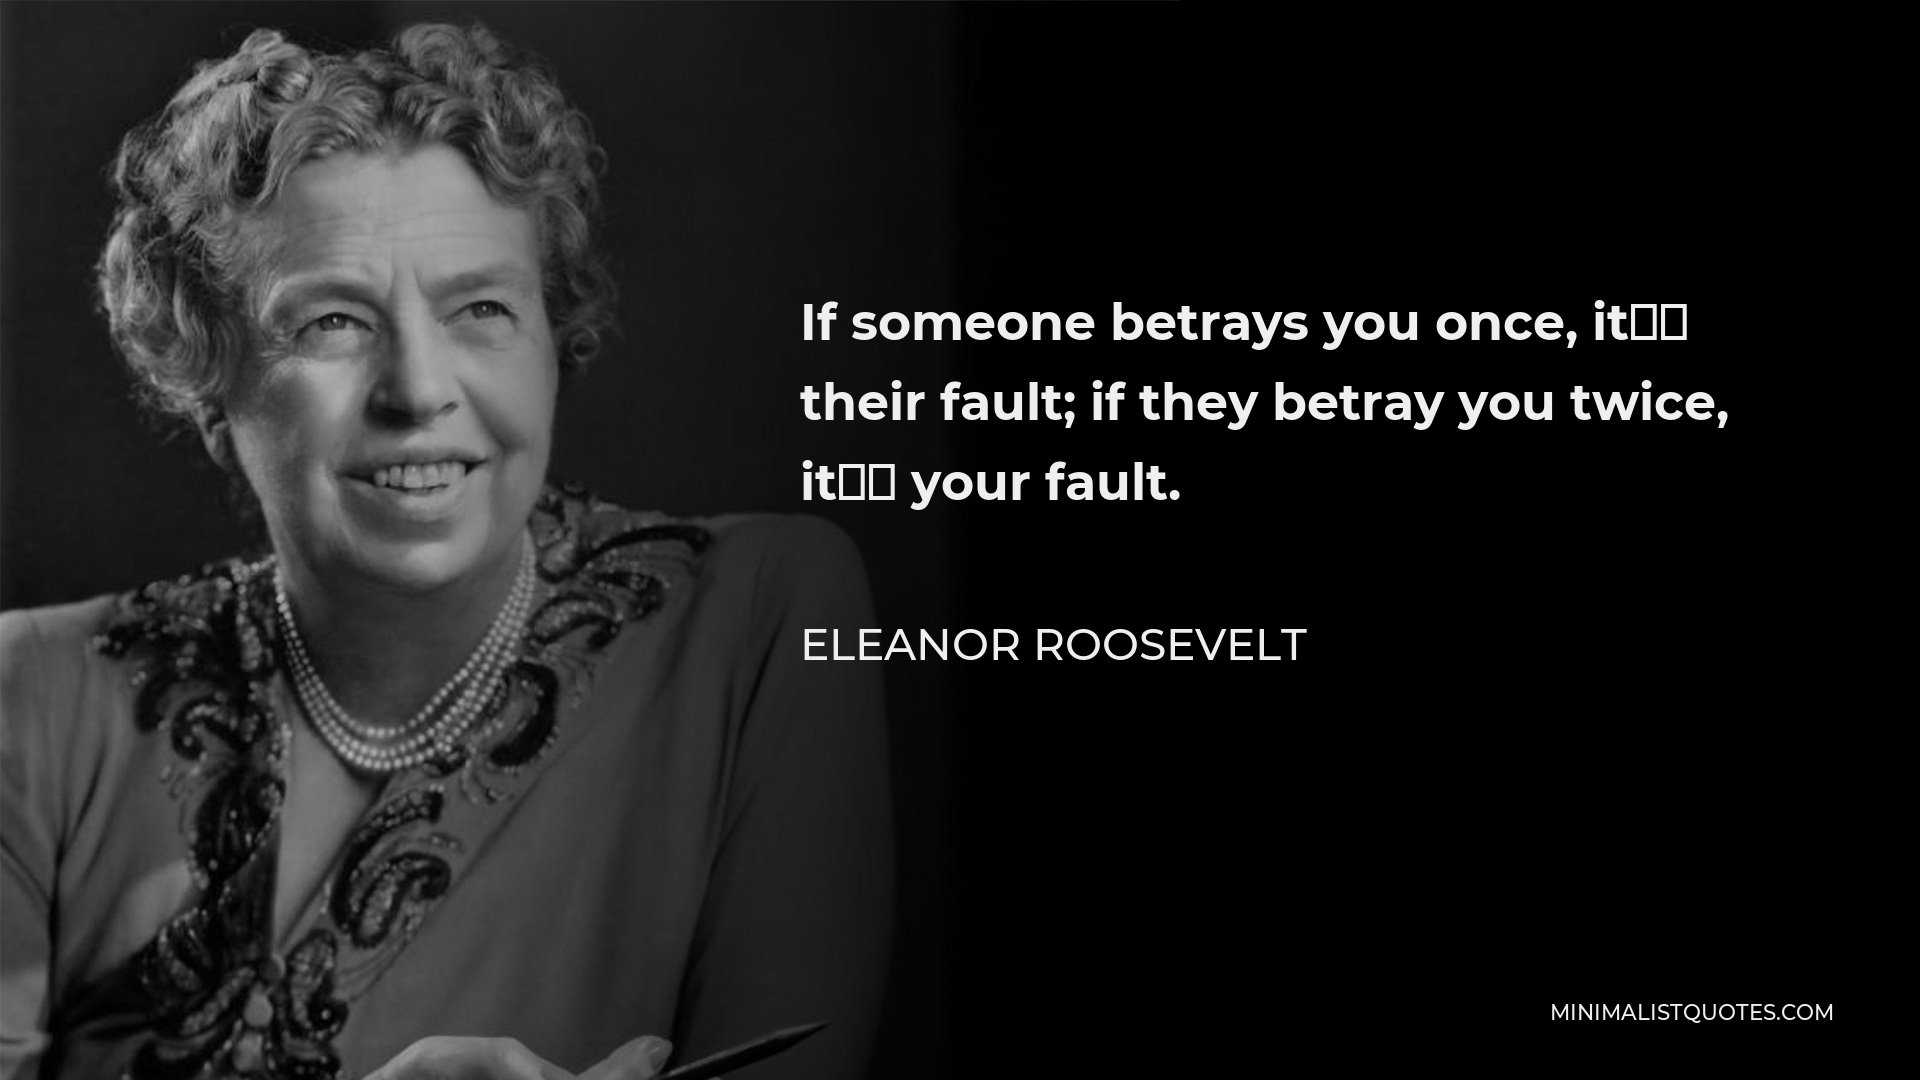 Eleanor Roosevelt Quote - If someone betrays you once, it’s their fault; if they betray you twice, it’s your fault.